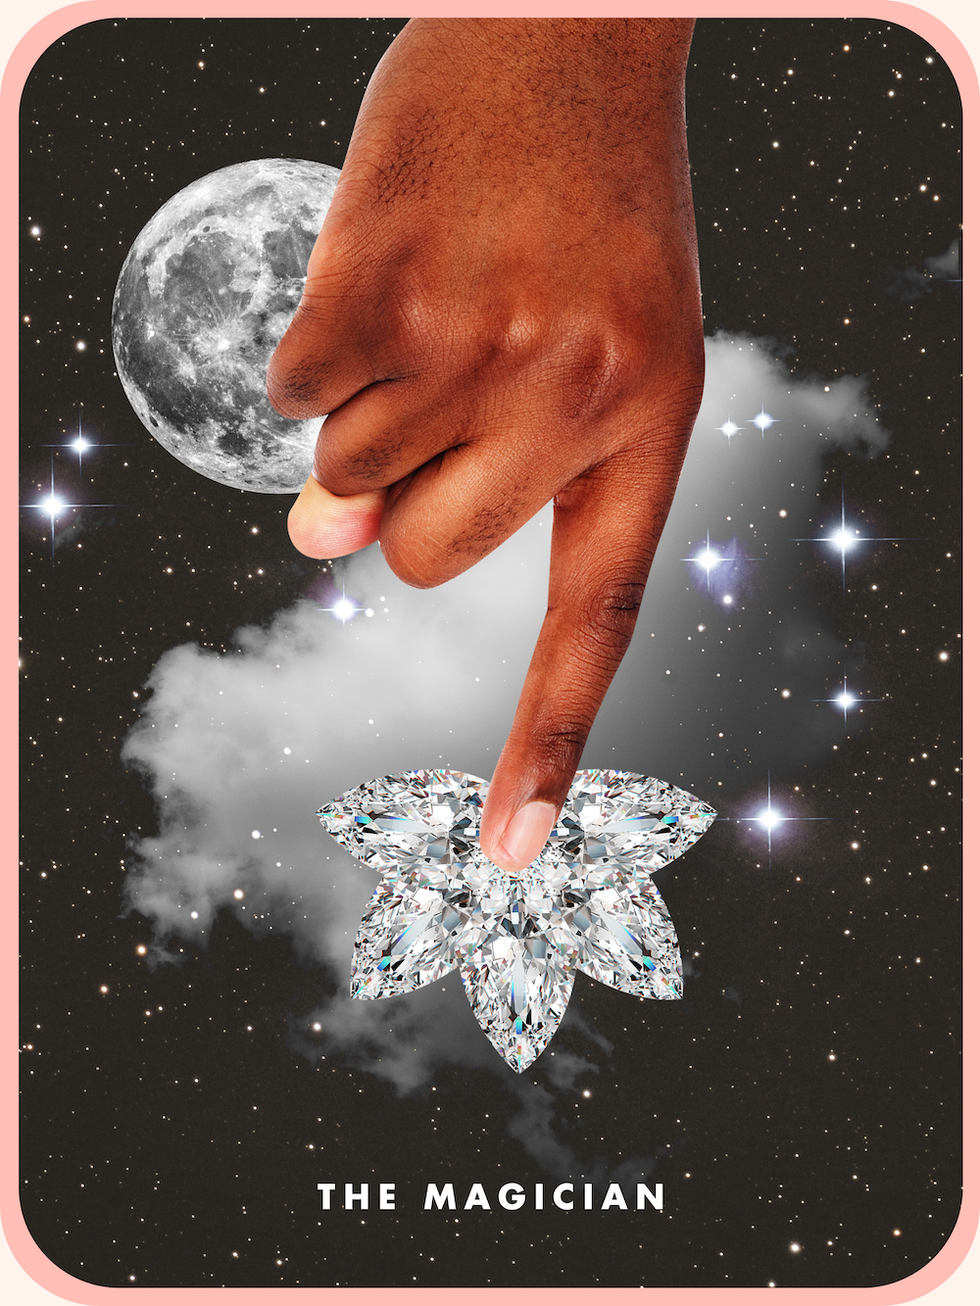 the tarot card the magician, showing a hand reaching down to touch a star shaped diamond